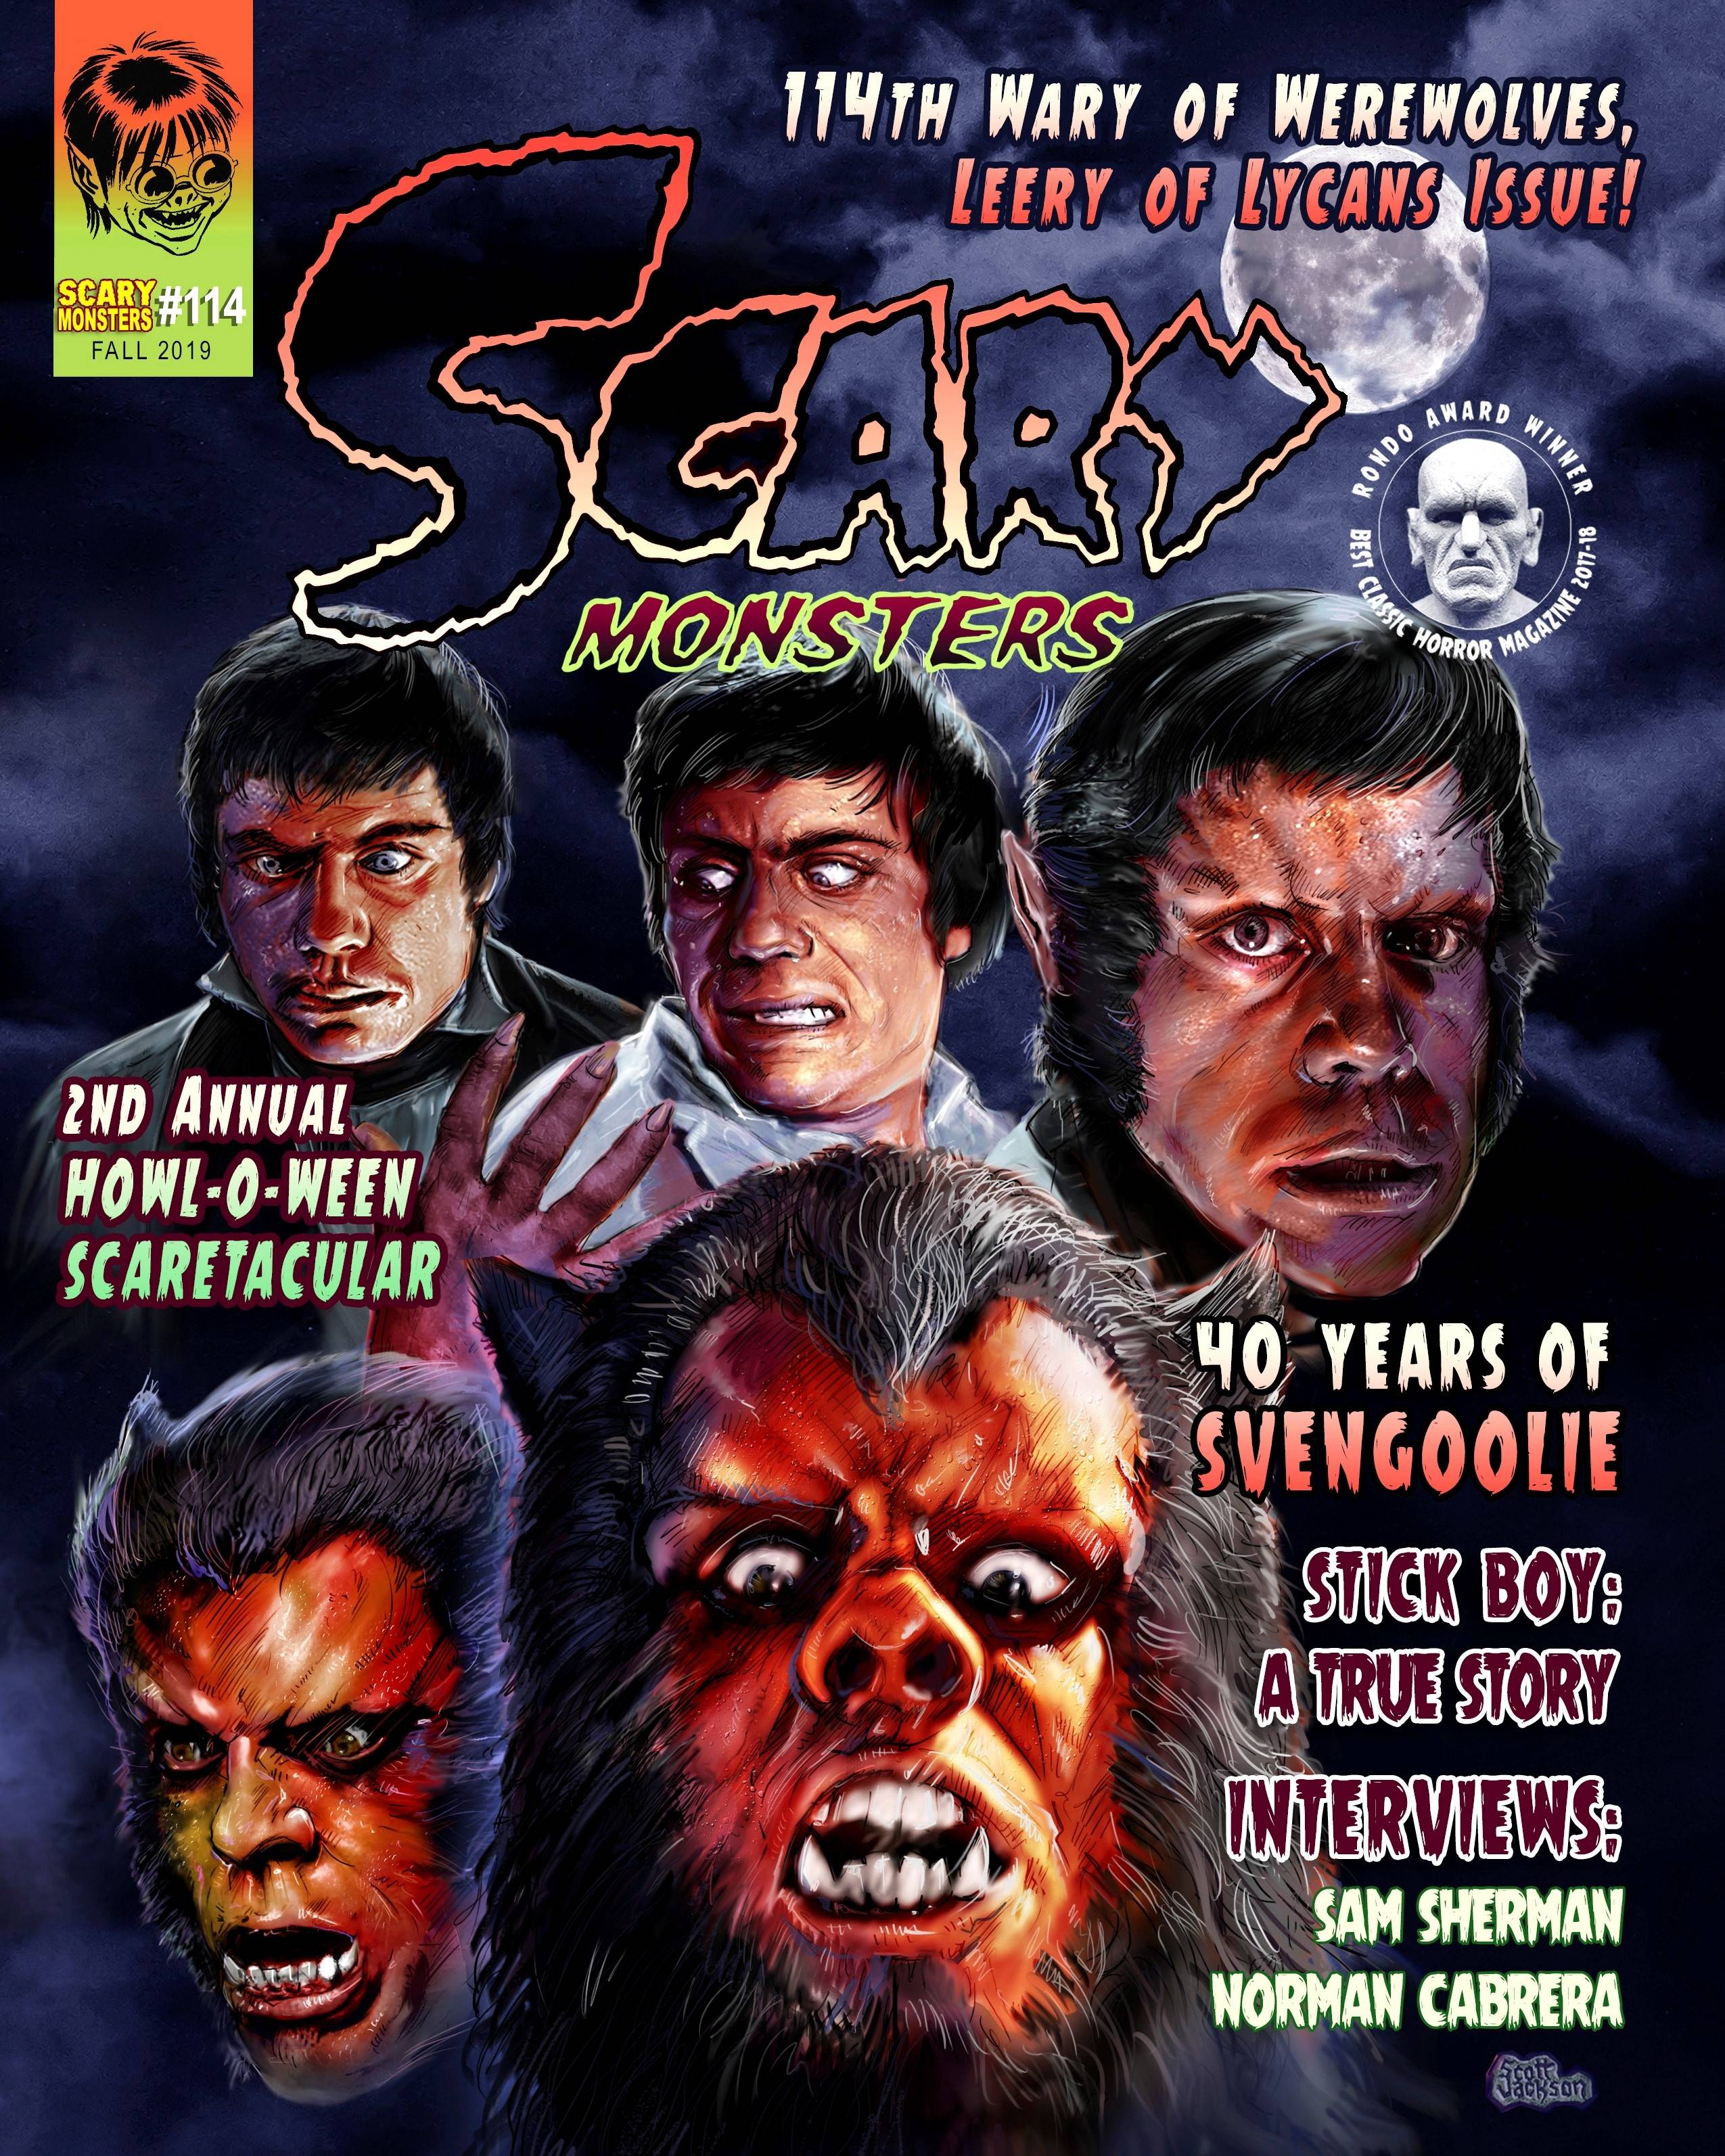 SCARY MONSTERS MAGAZINE #114